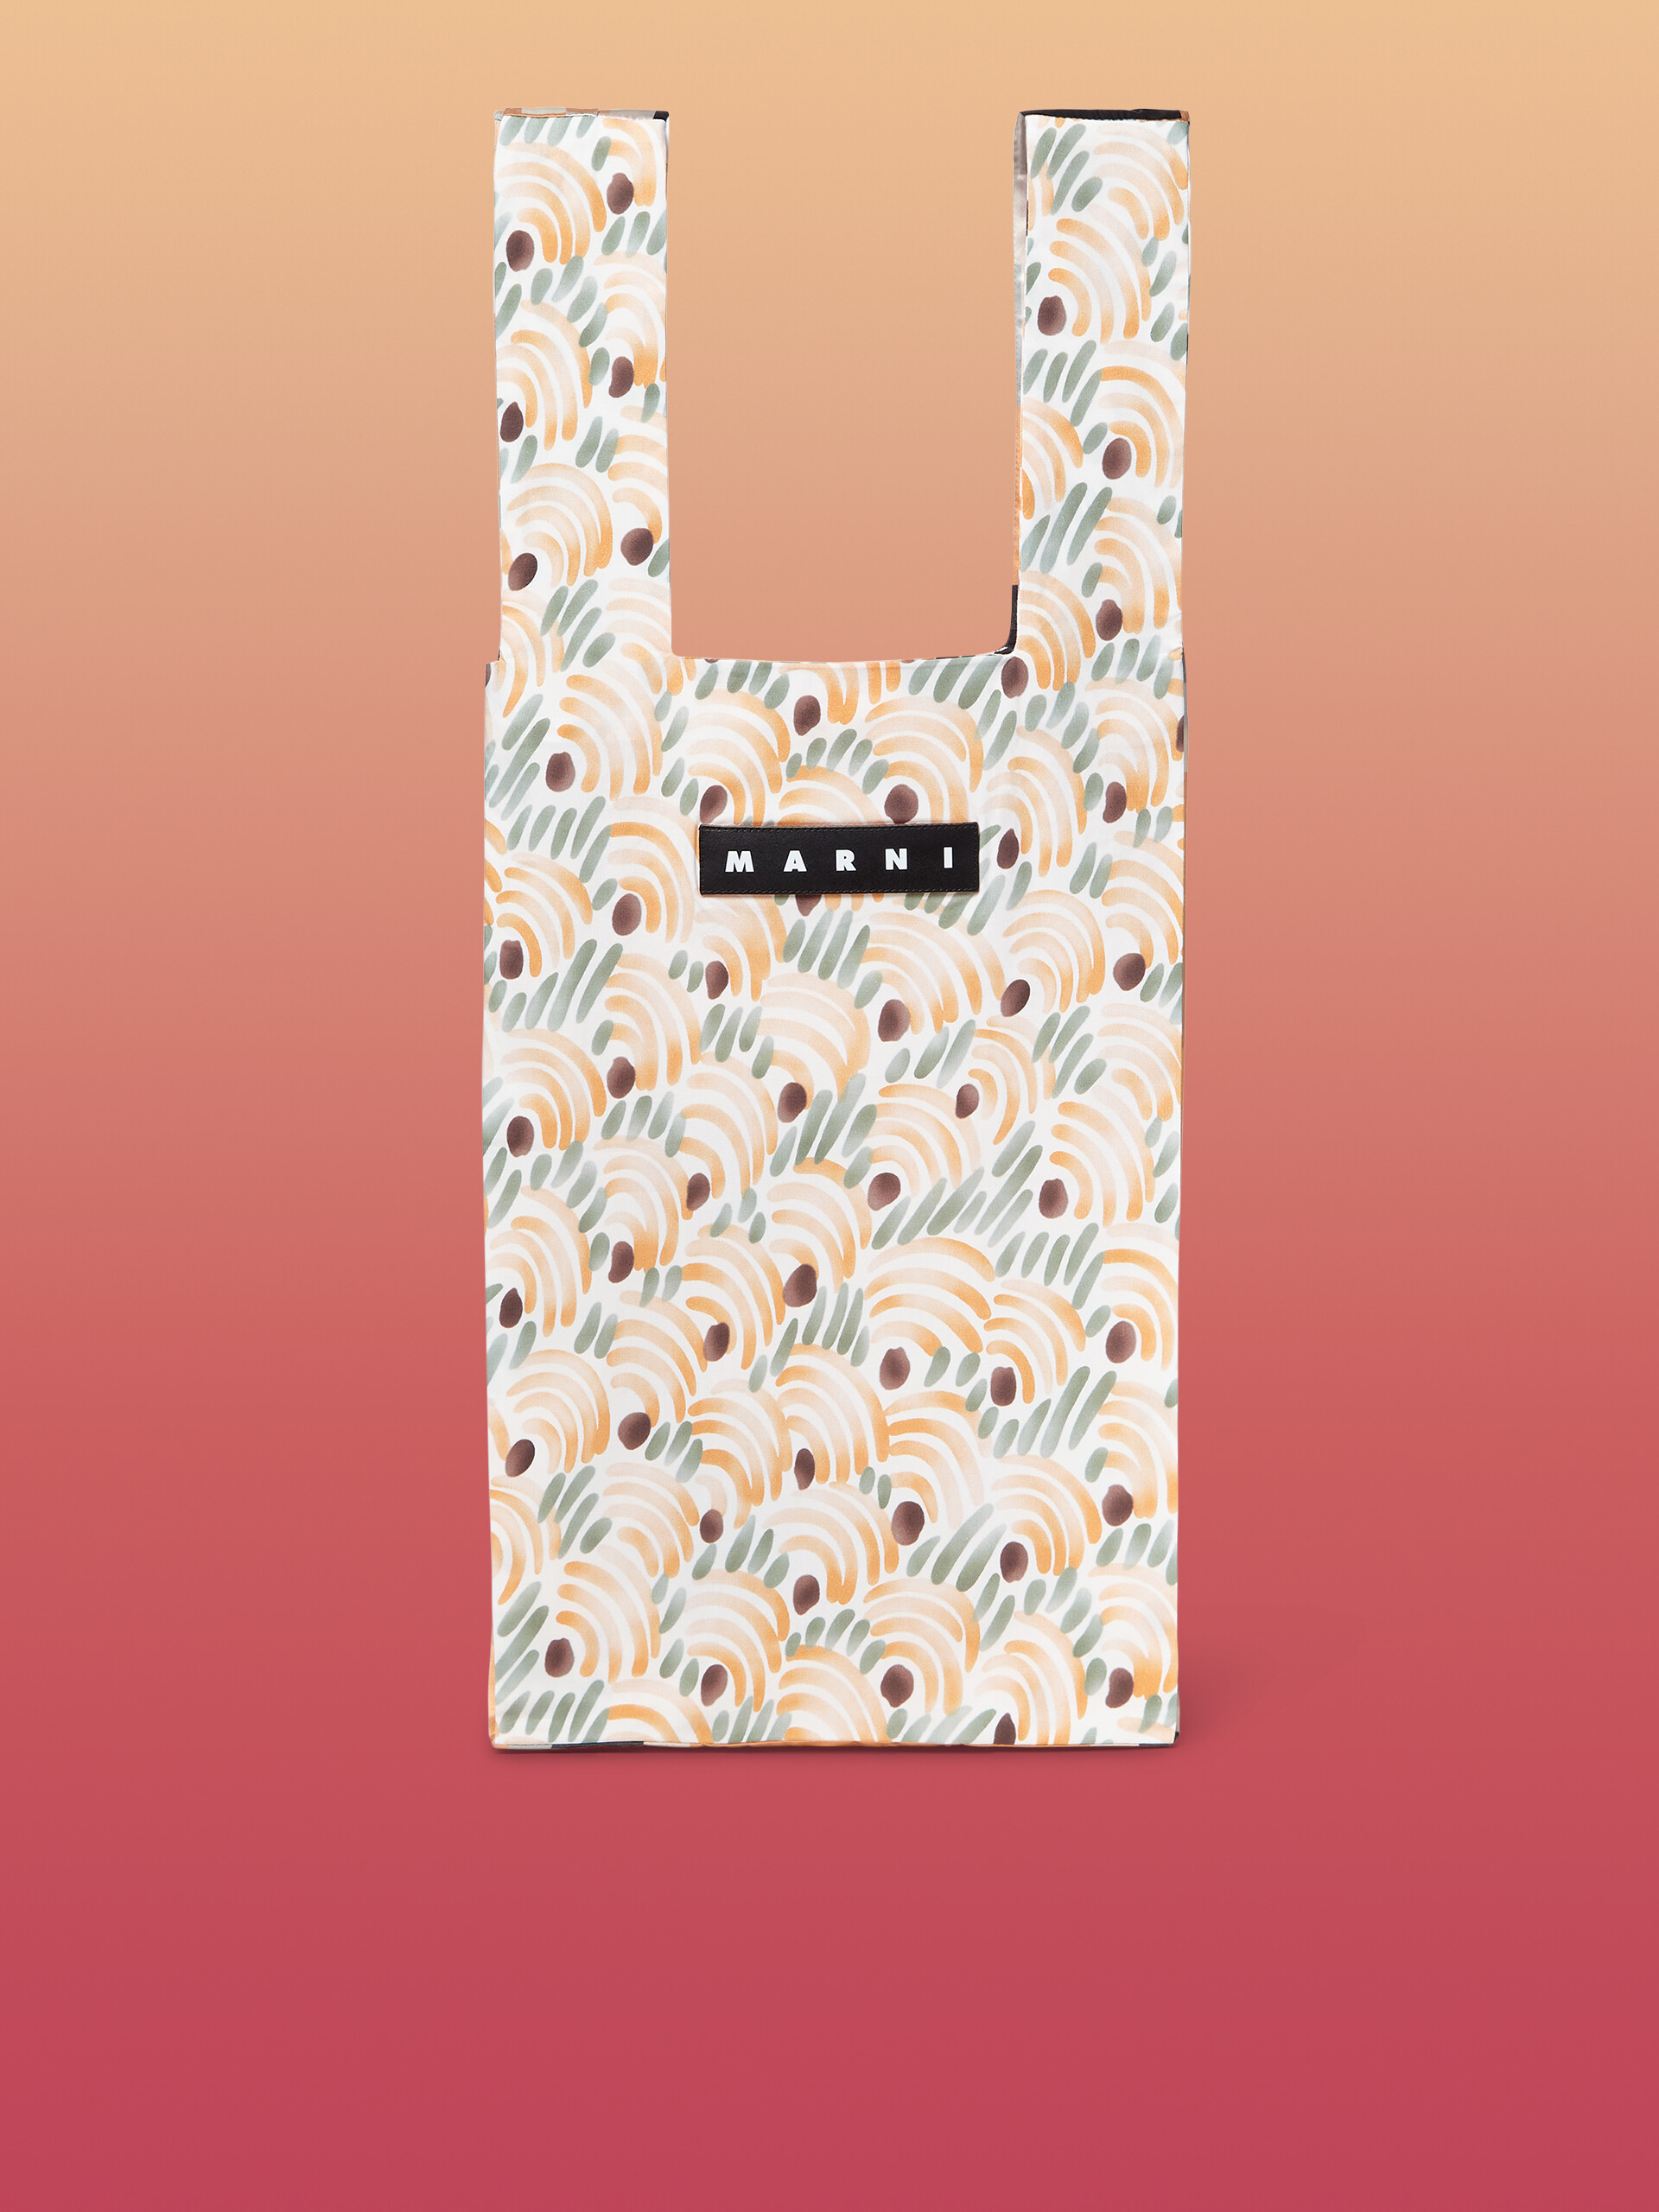 MARNI MARKET cotton shopping bag with abstract and pixel print - Bags - Image 1